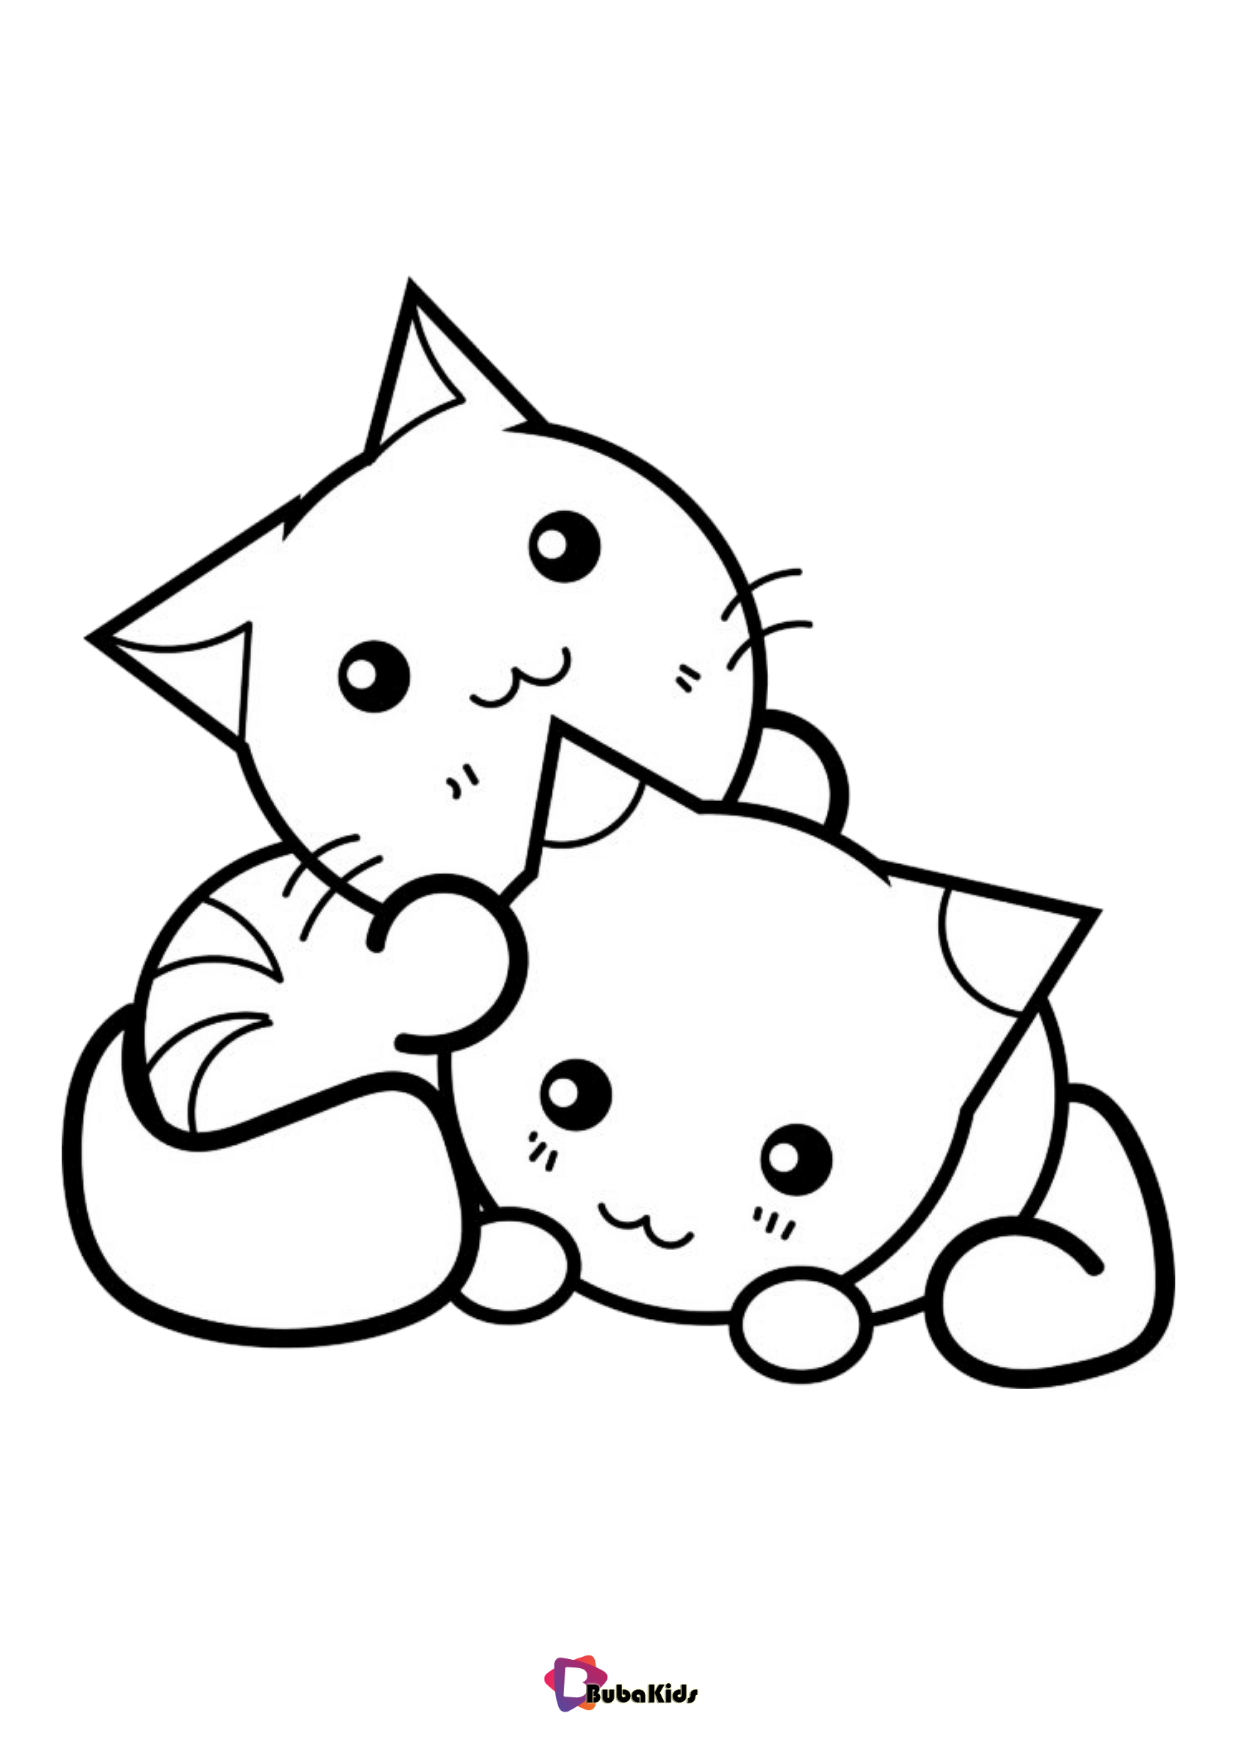 Cute kittens coloring pages bubakids cat animal coloring Wallpaper